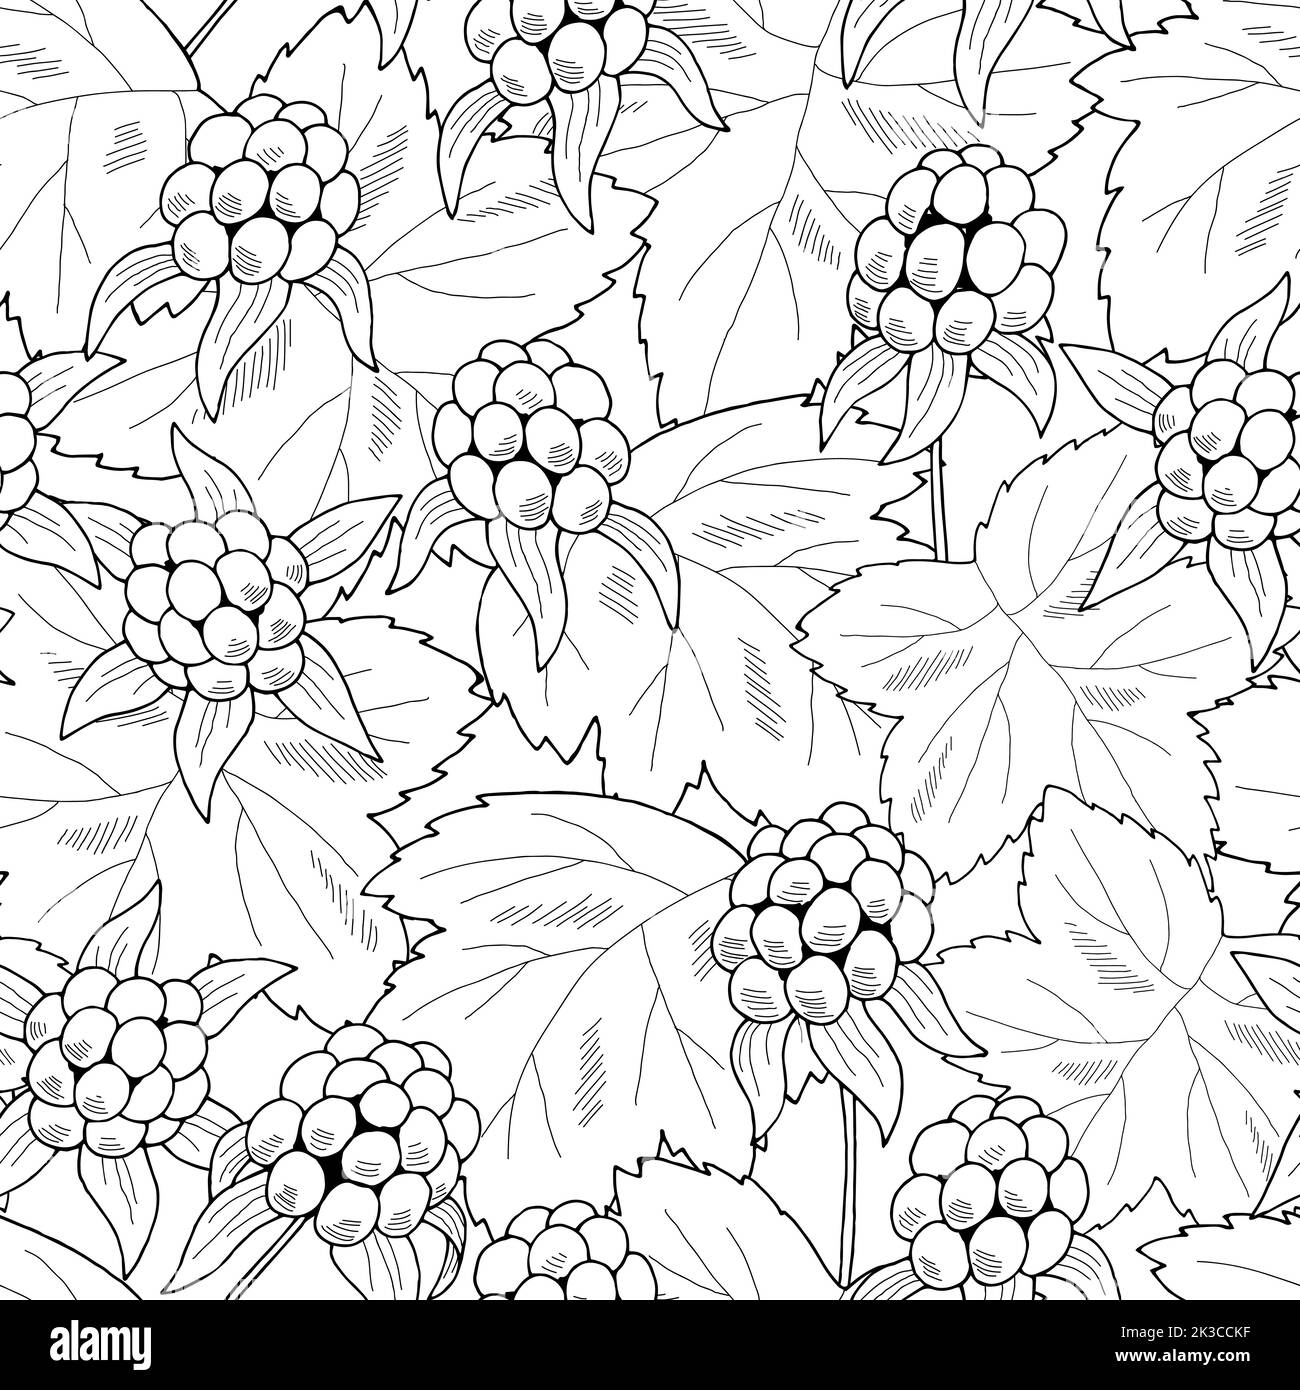 Cloudberry berry seamless pattern background graphic black white sketch illustration vector Stock Vector